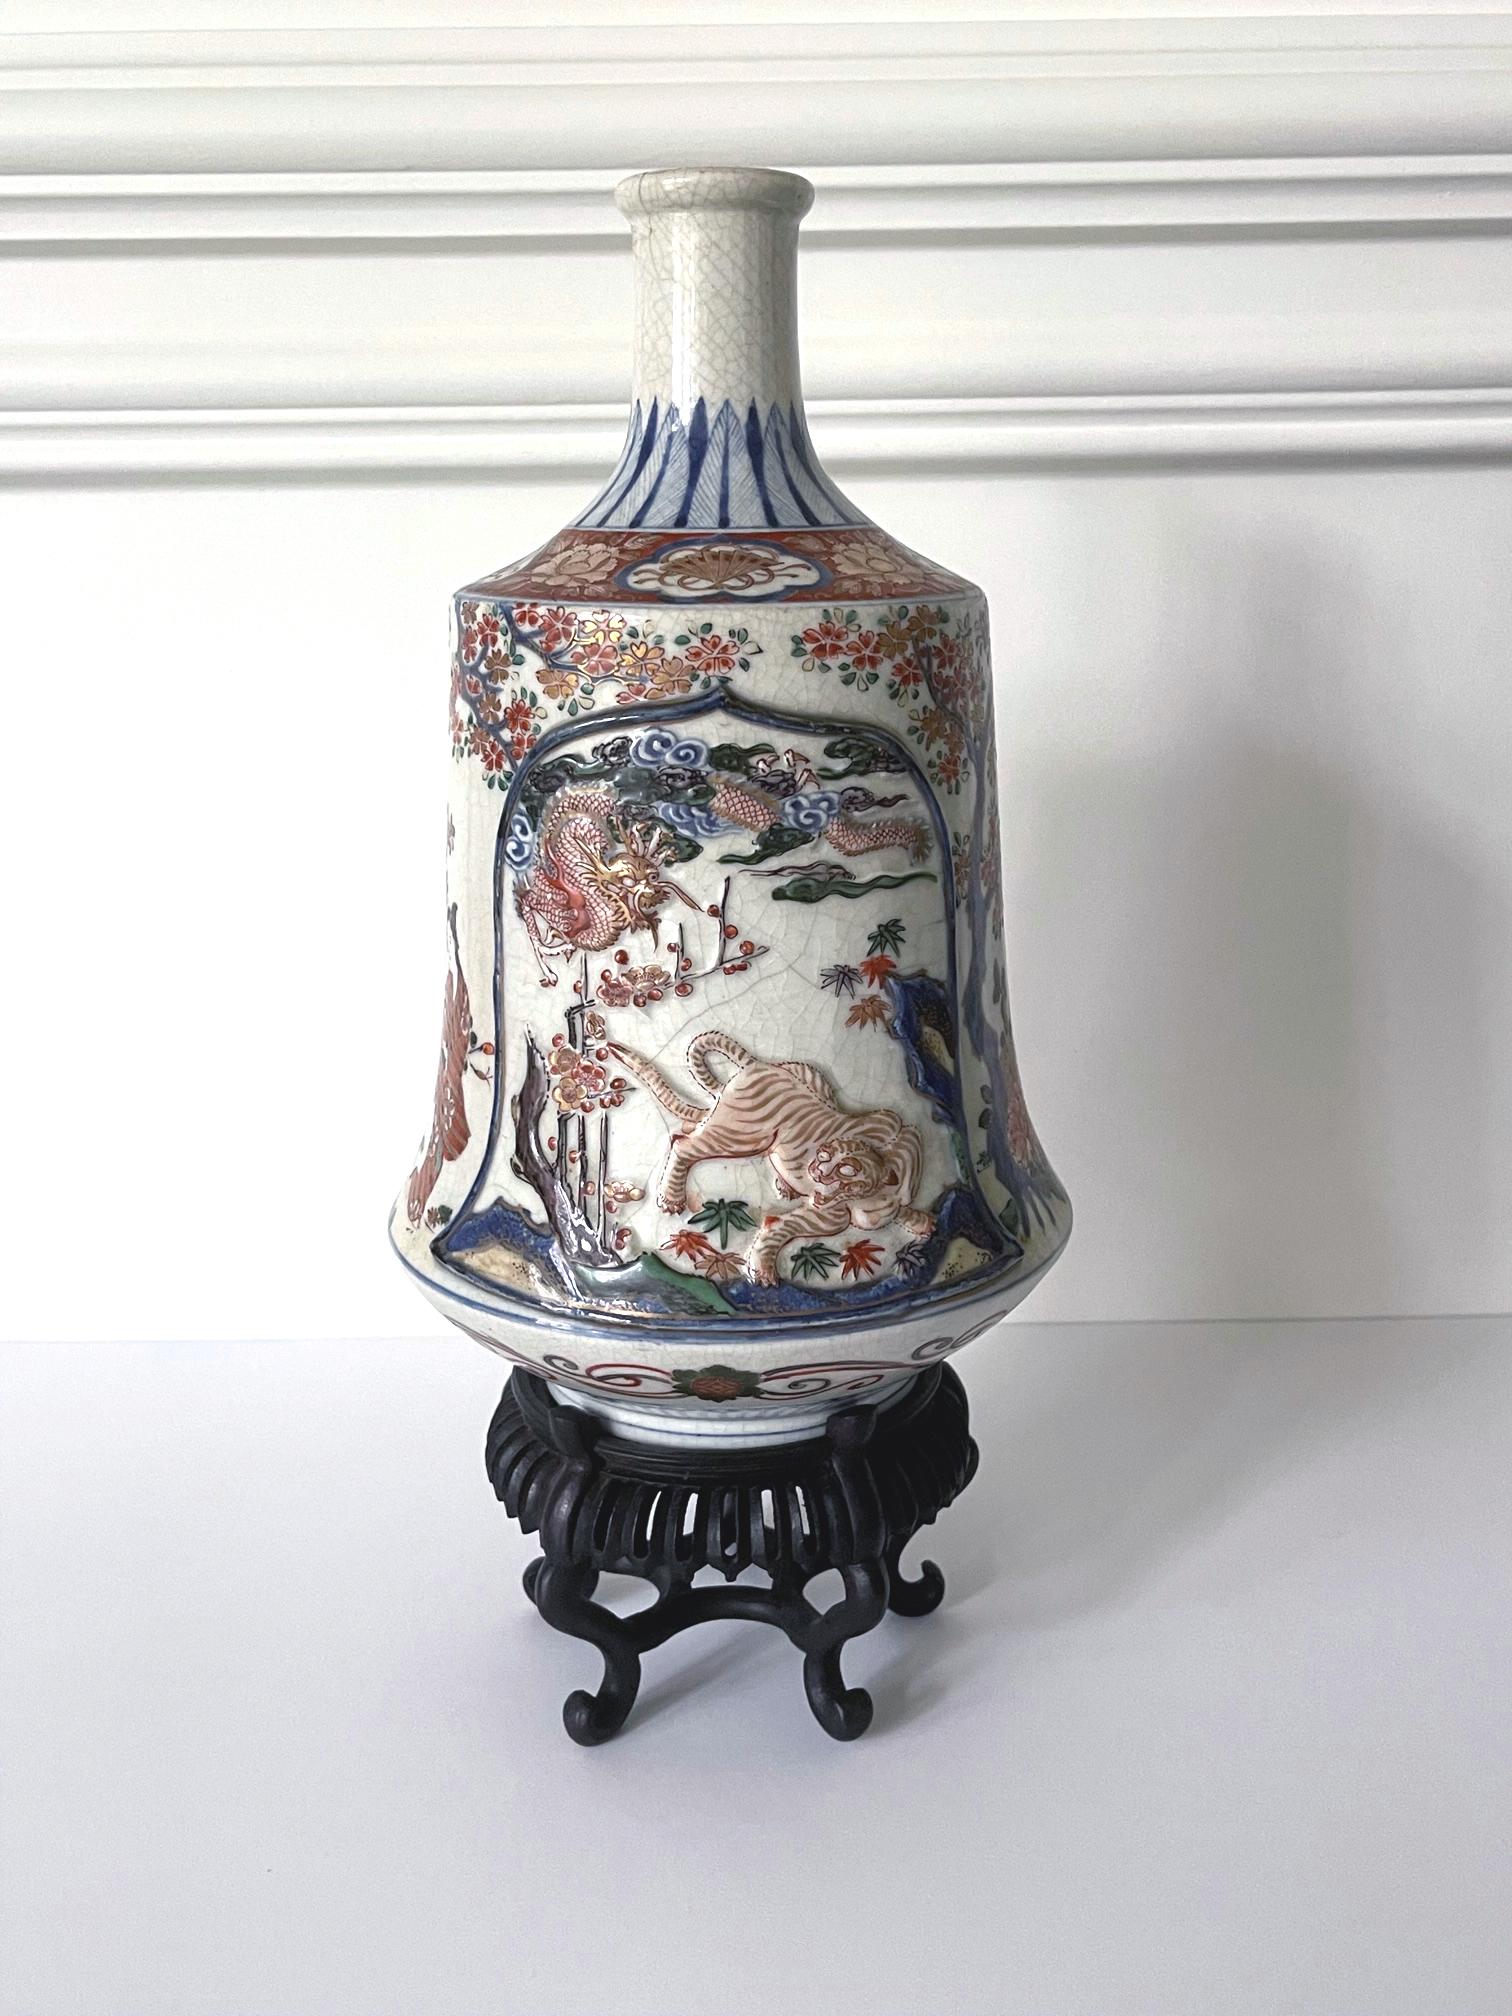 On offer is a large Japanese Imari ceramic bottle vase with elaborate surface design circa 19th century (late Meiji Period). The distinct shape of the bottle is called tea-whisk form and the rare prototype was found in the early Ko-Imari production